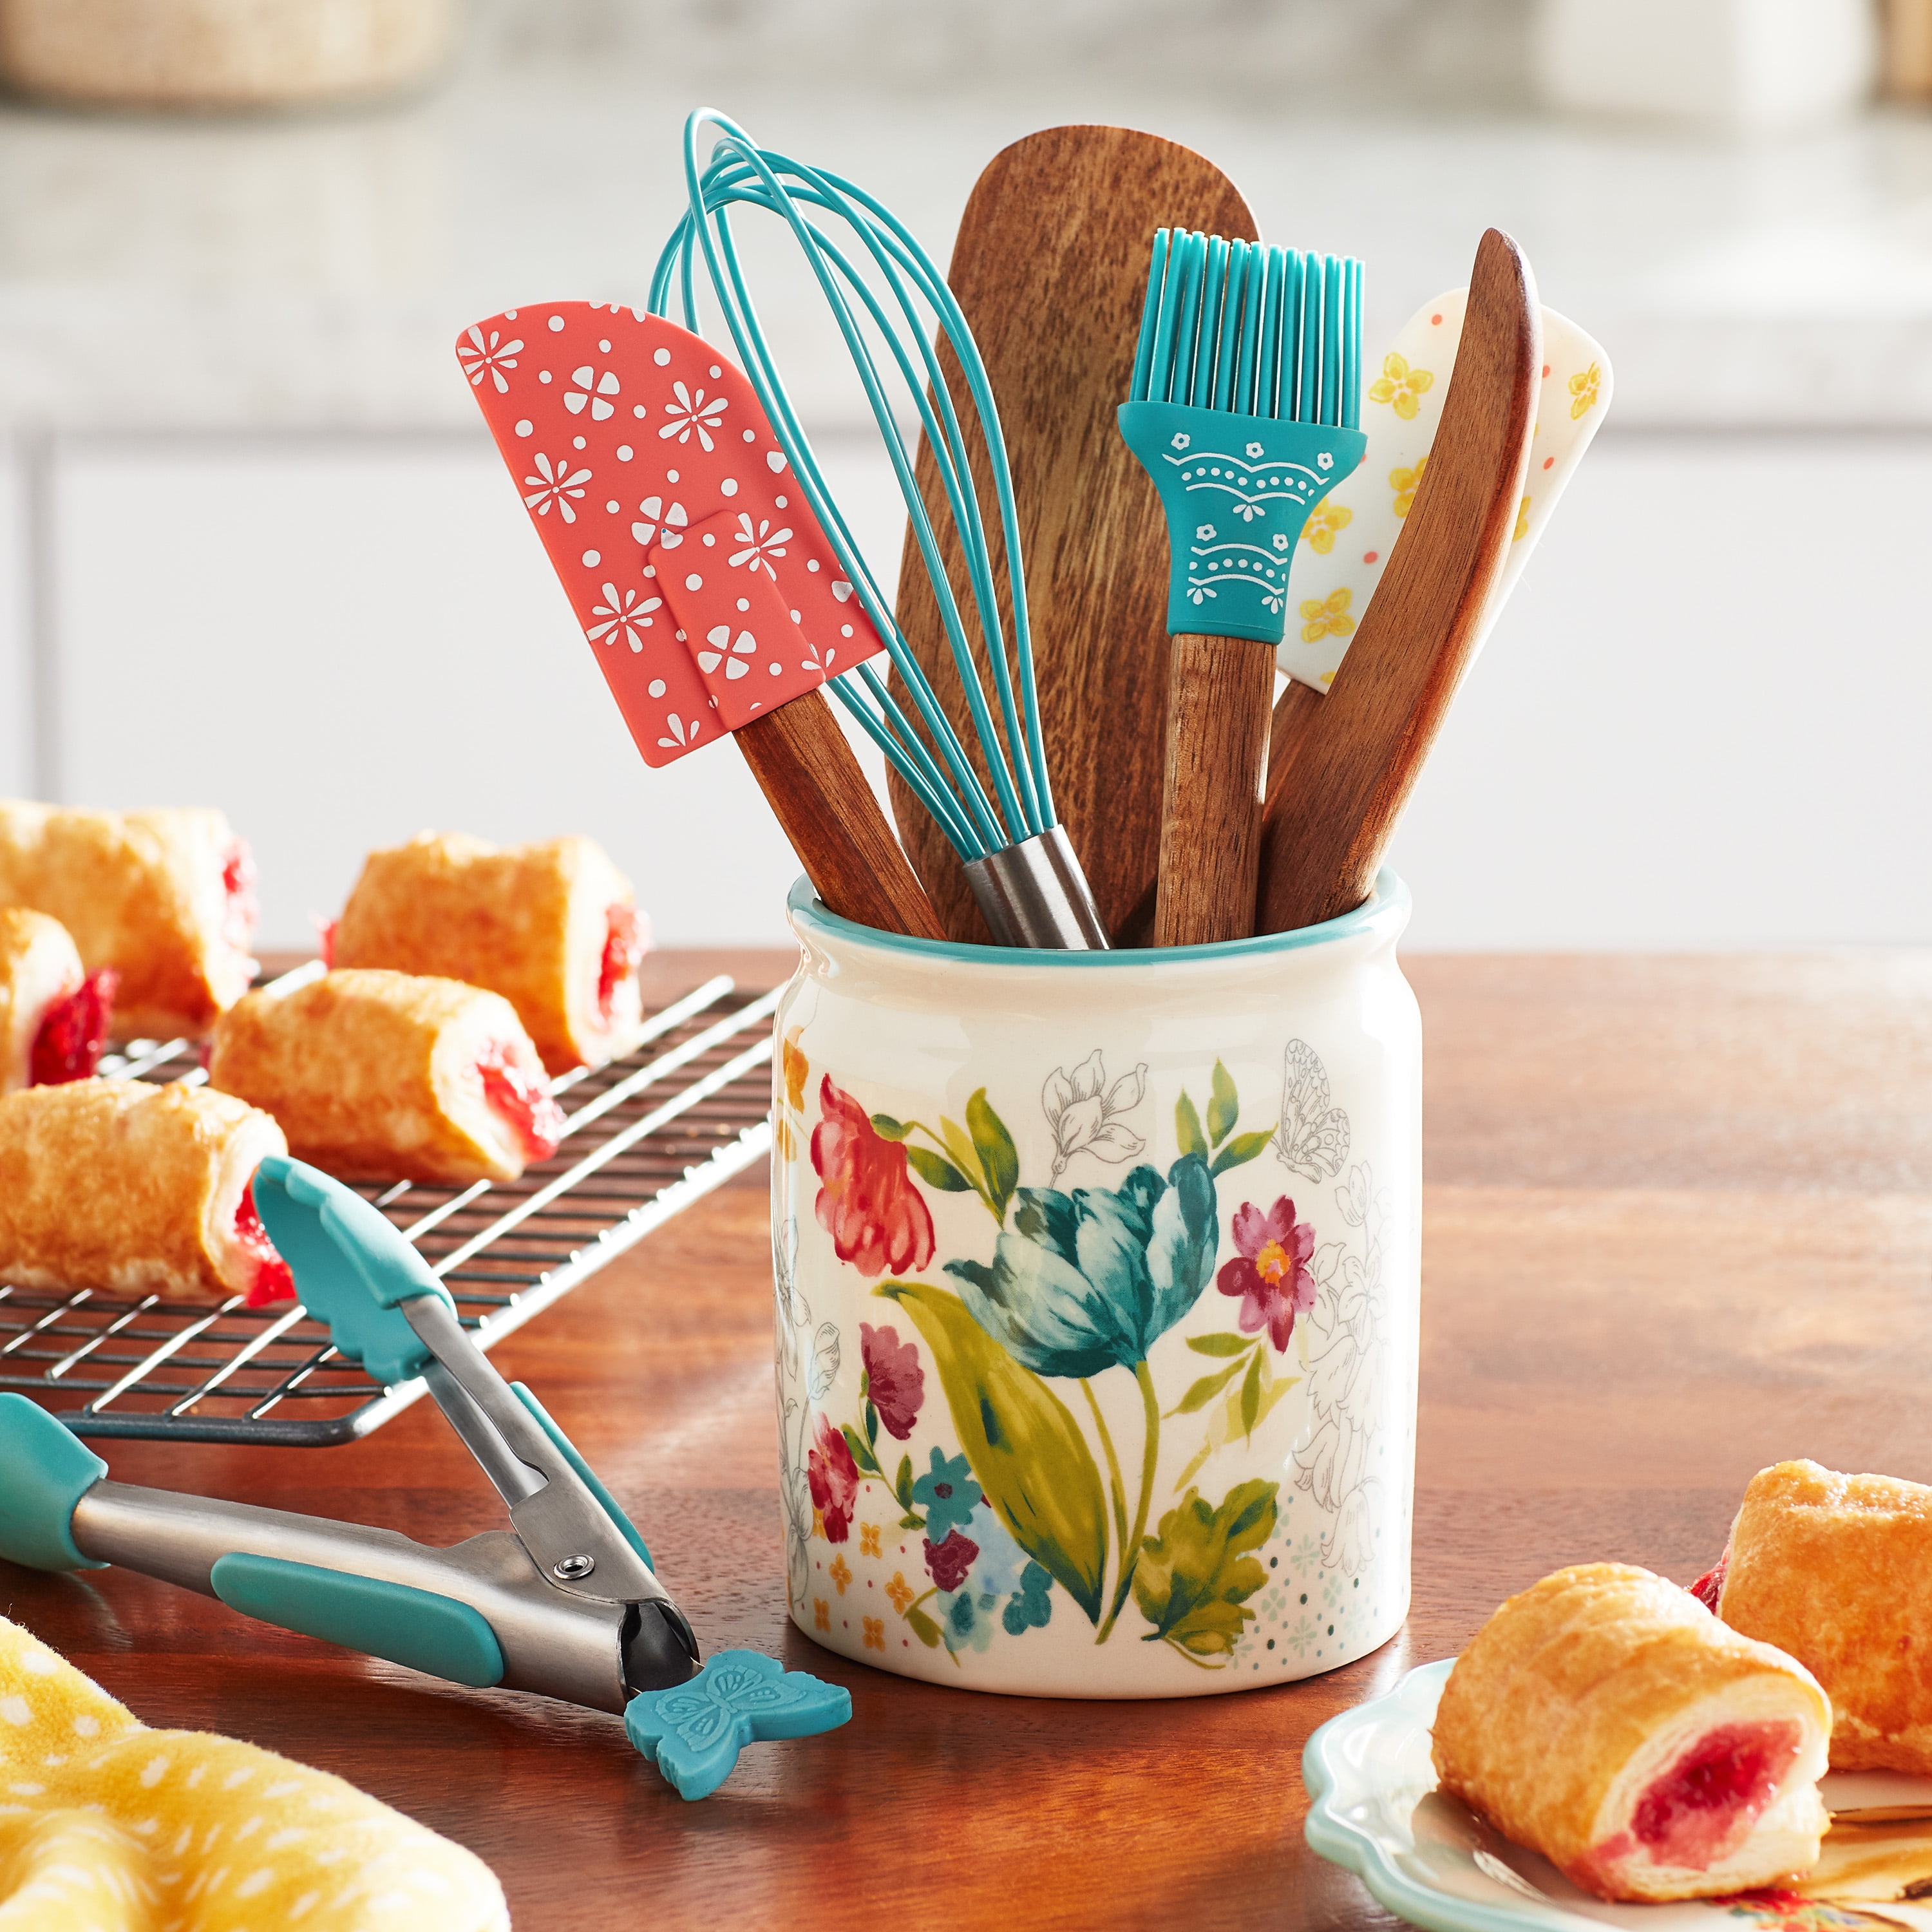 The Pioneer Woman Silicone Kitchen Utensils & Mixing Bowl 14-Piece Set  $19.96 (Reg. $30) - Fabulessly Frugal